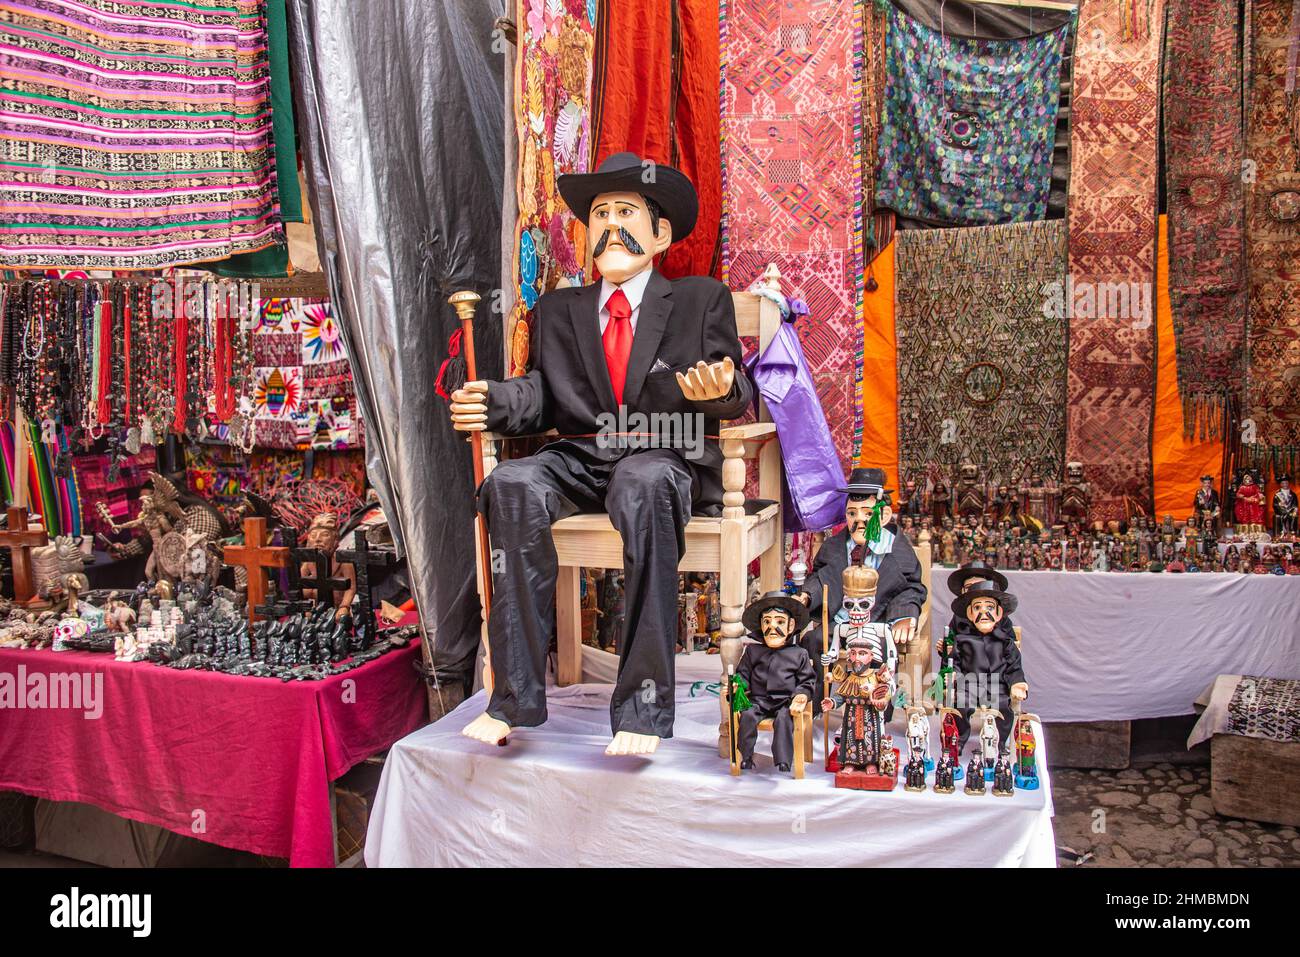 Textiles for sale at the Sunday market in Chichicastenango, Guatemala Stock Photo